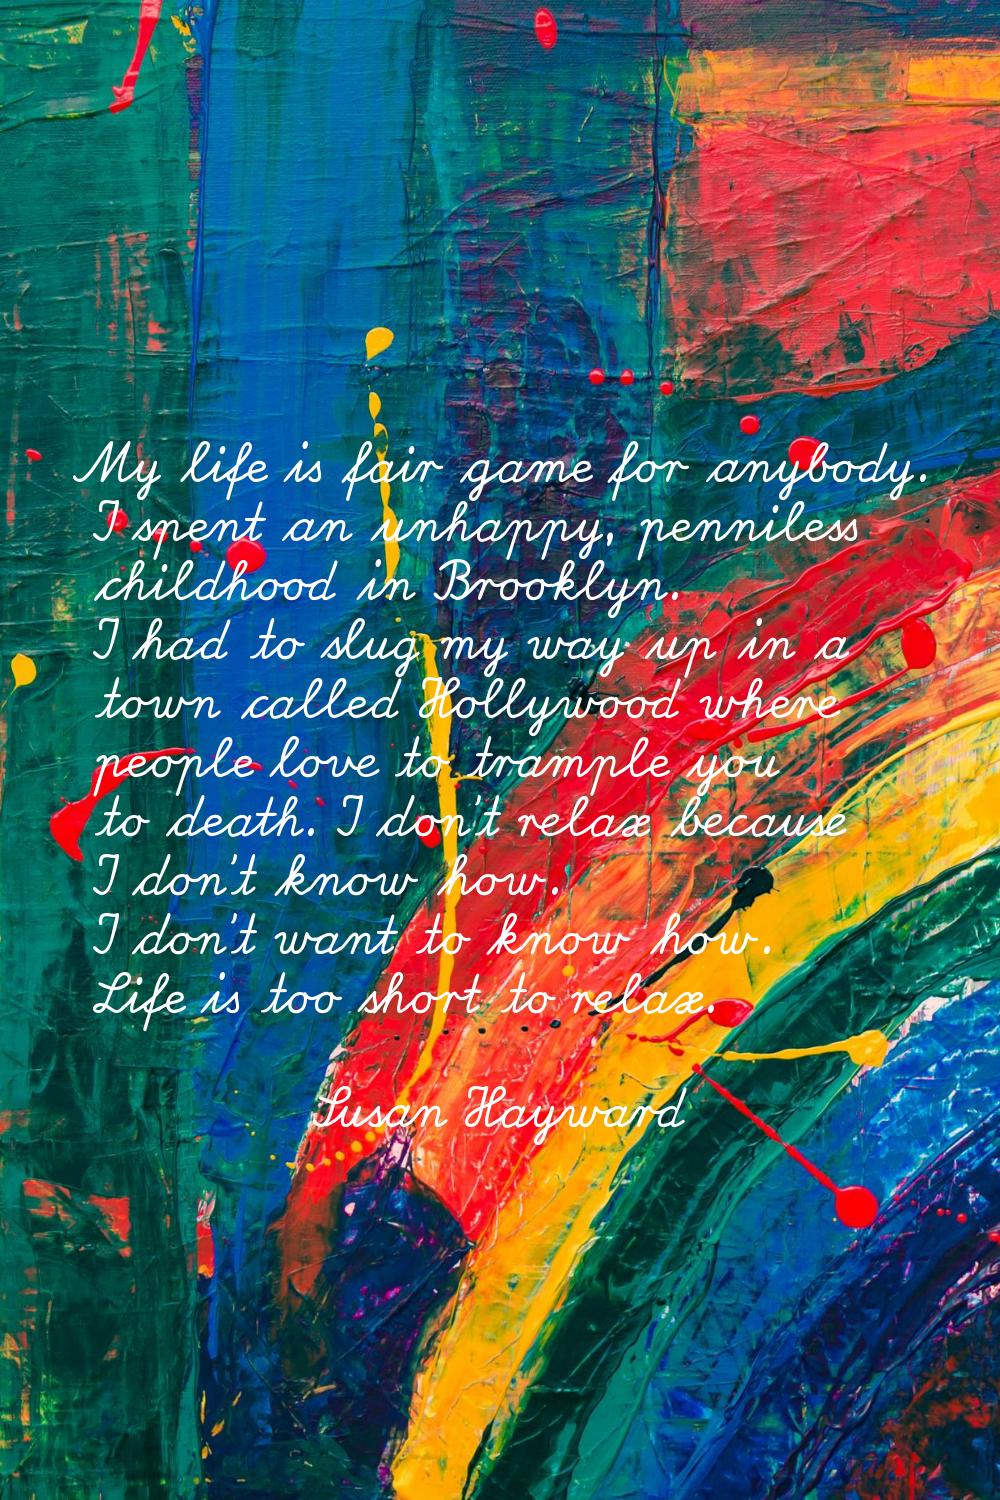 My life is fair game for anybody. I spent an unhappy, penniless childhood in Brooklyn. I had to slu